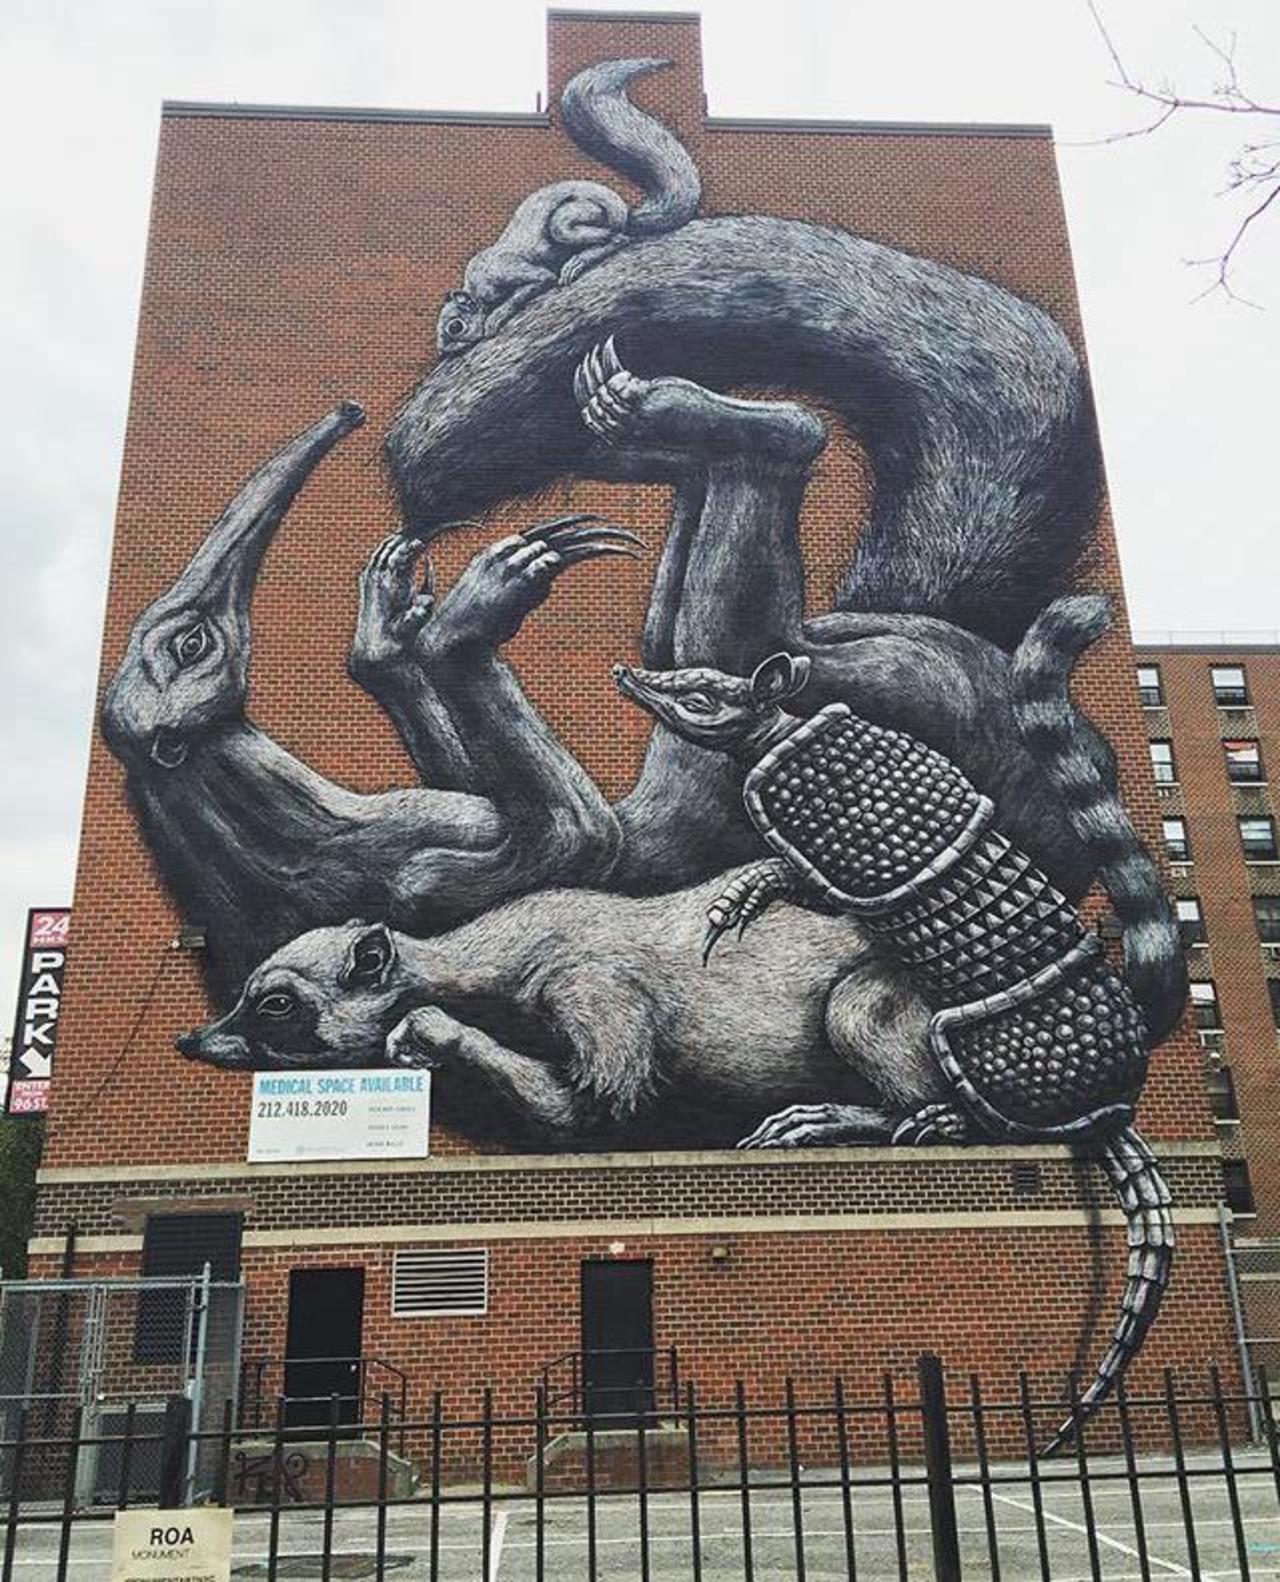 The completed new large scale Street Art wall by ROA in NYC

#art #graffiti #mural #streetart http://t.co/G1ml9nbn1m